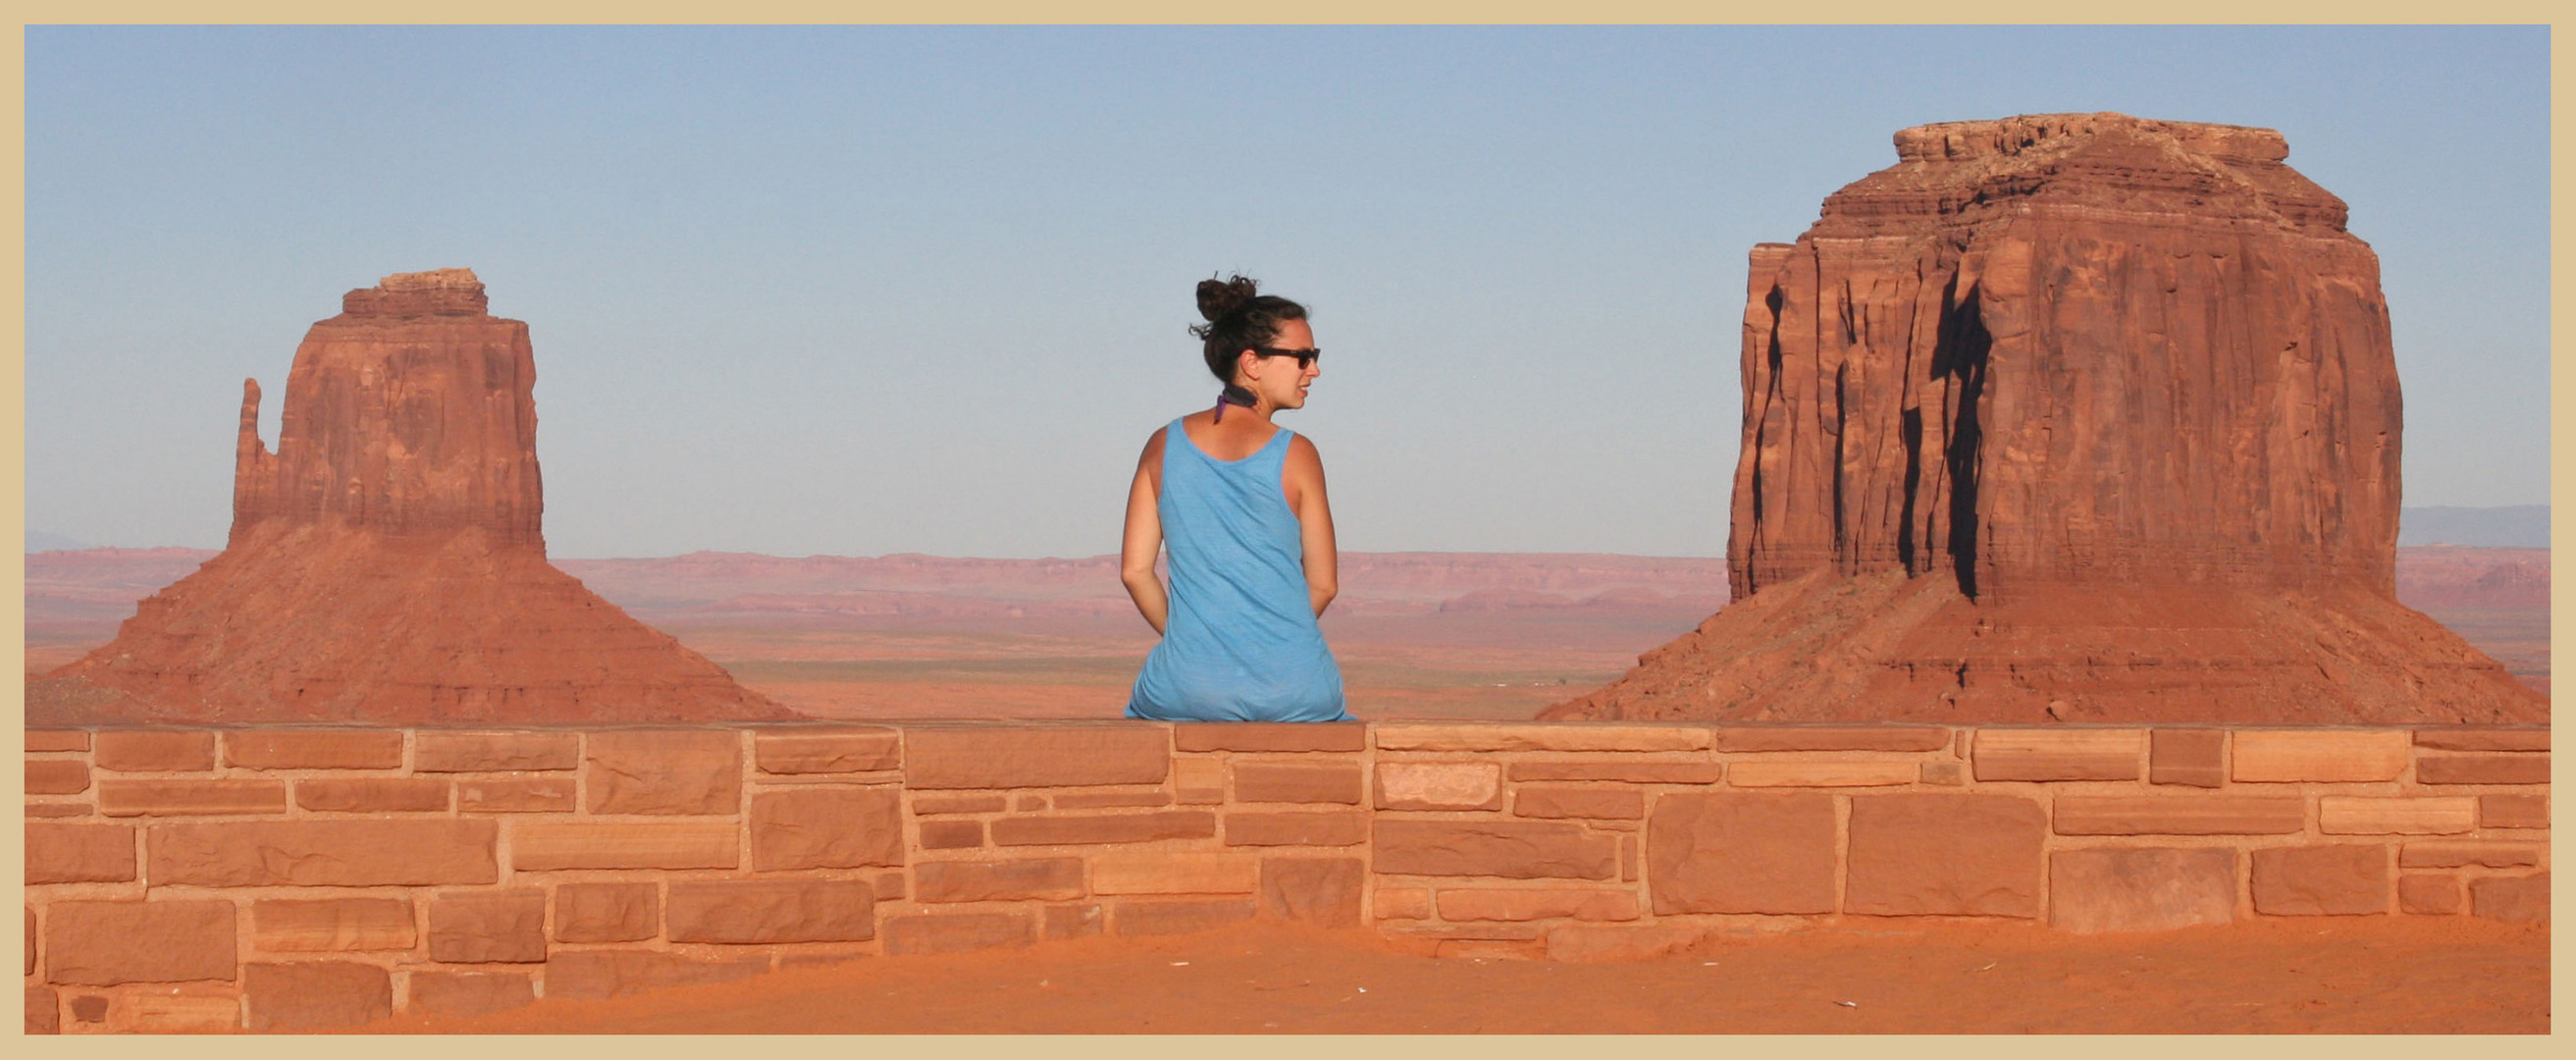 spectator at Monument valley